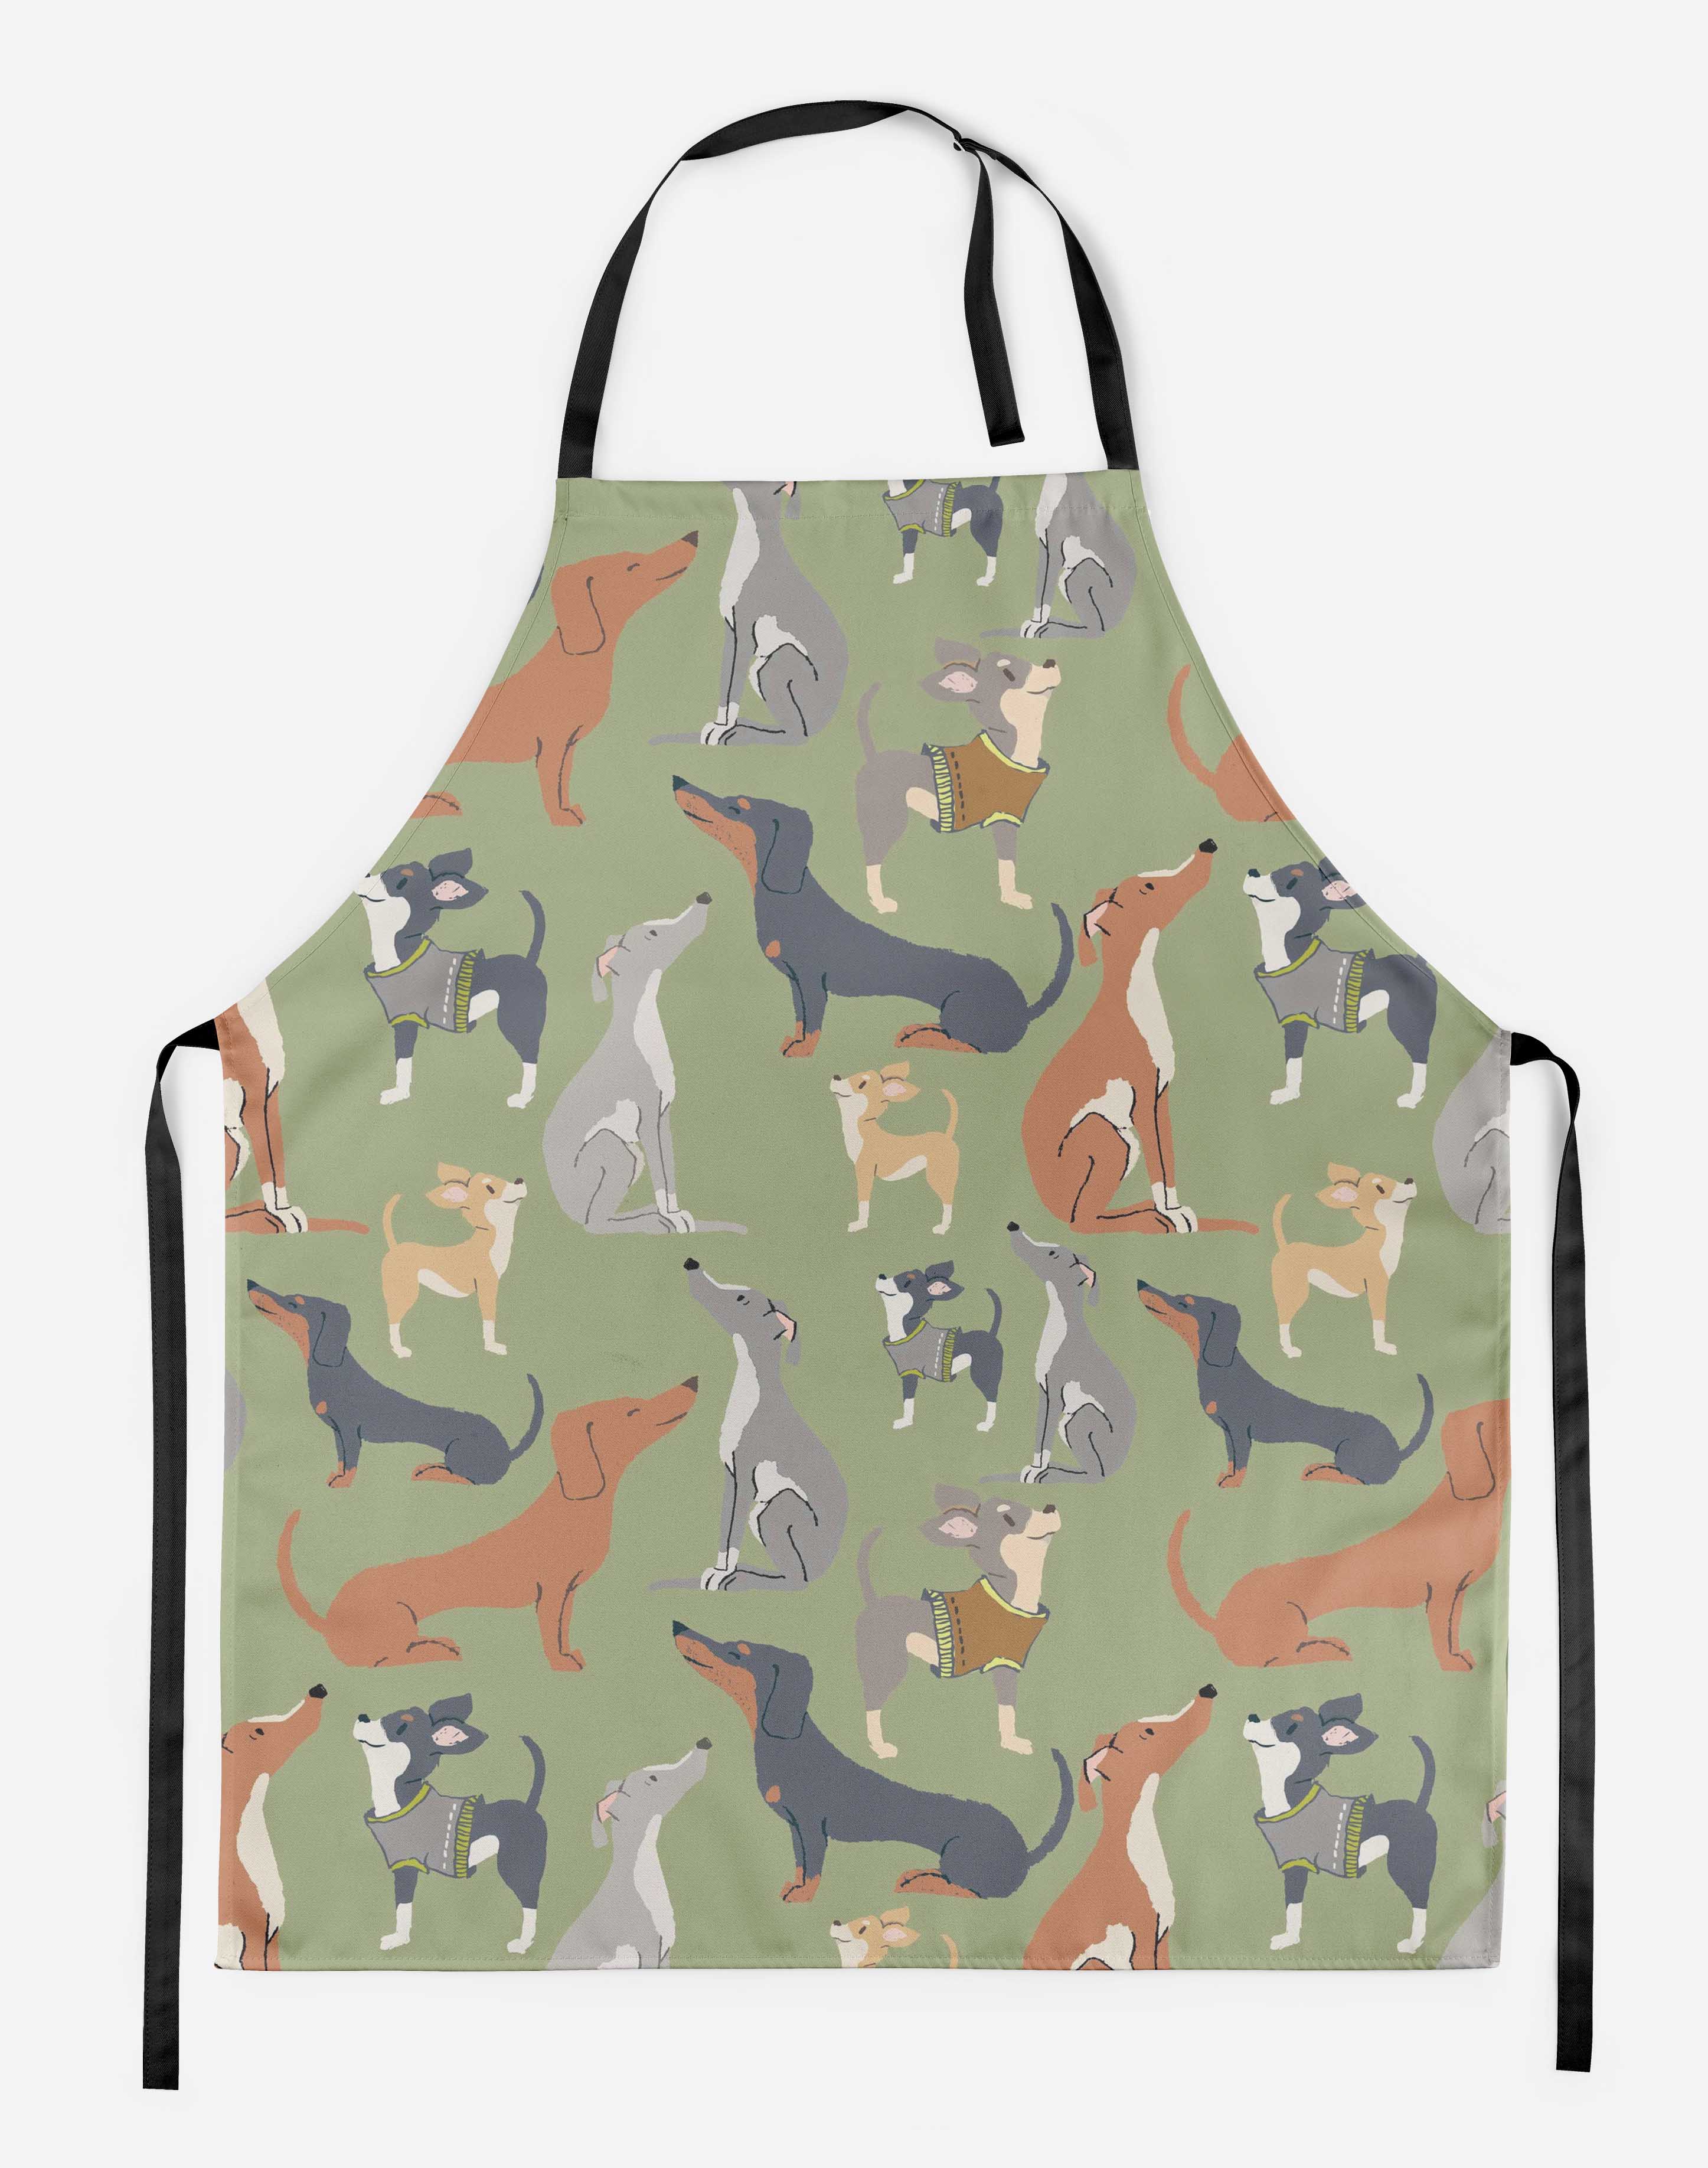 S4Sassy Green Cute Dog Adjustable Printed Kitchen Apron With Tie-w2A | eBay